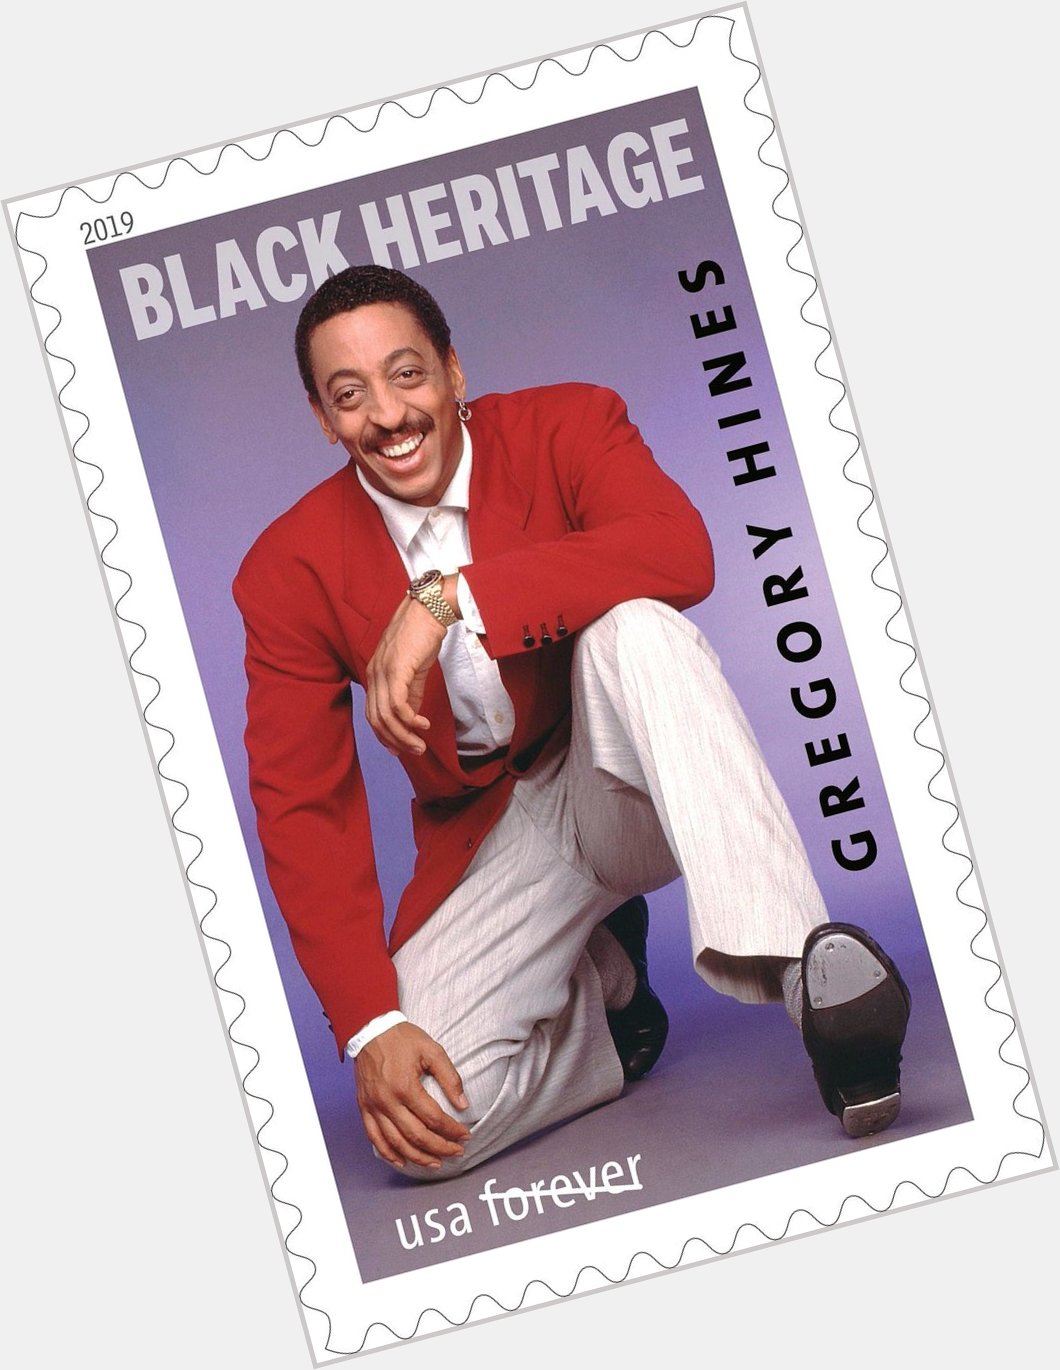 Happy birthday to the one and only Gregory Hines! You are so dearly missed.  